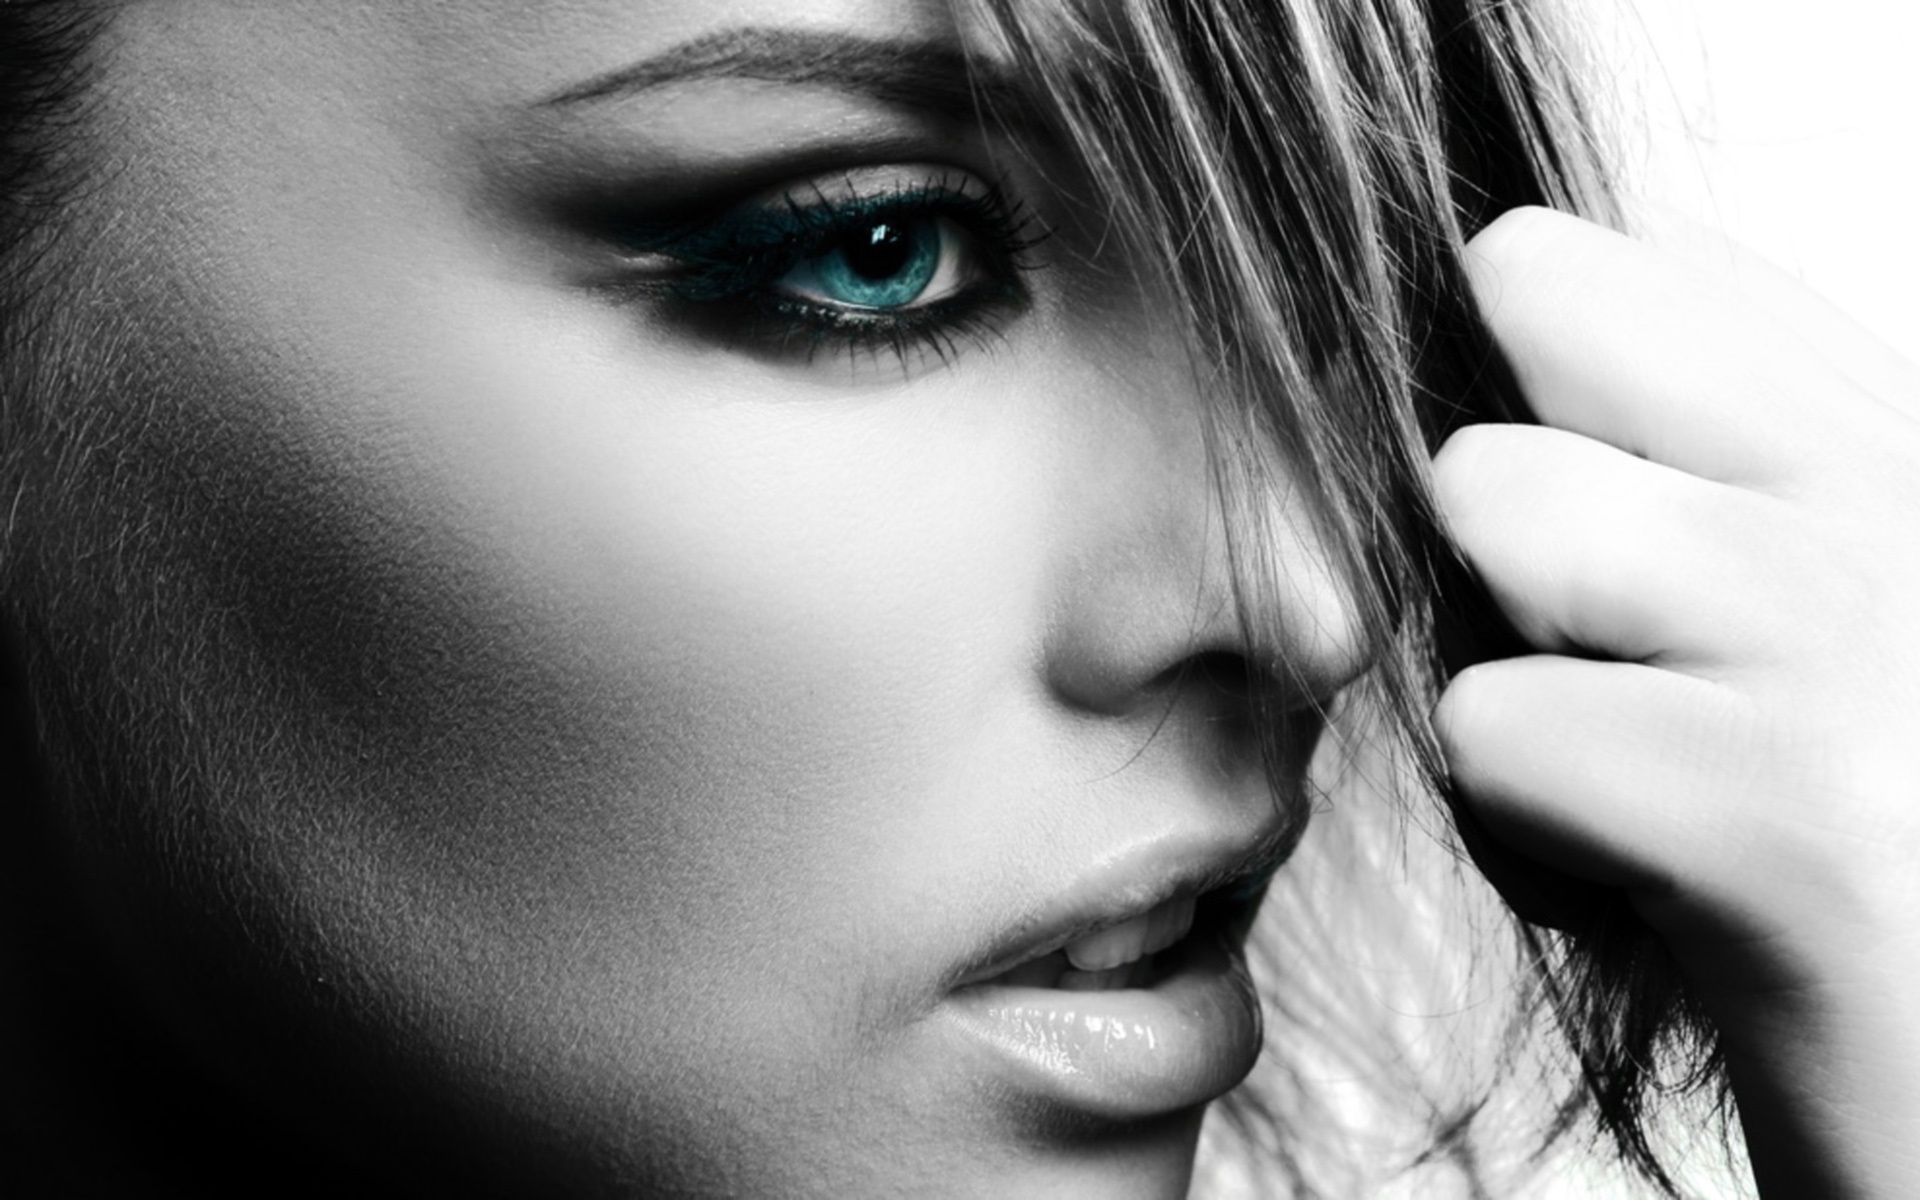 Girls   Beautyful Girls   Black and white portrait with blue eyes 047233 